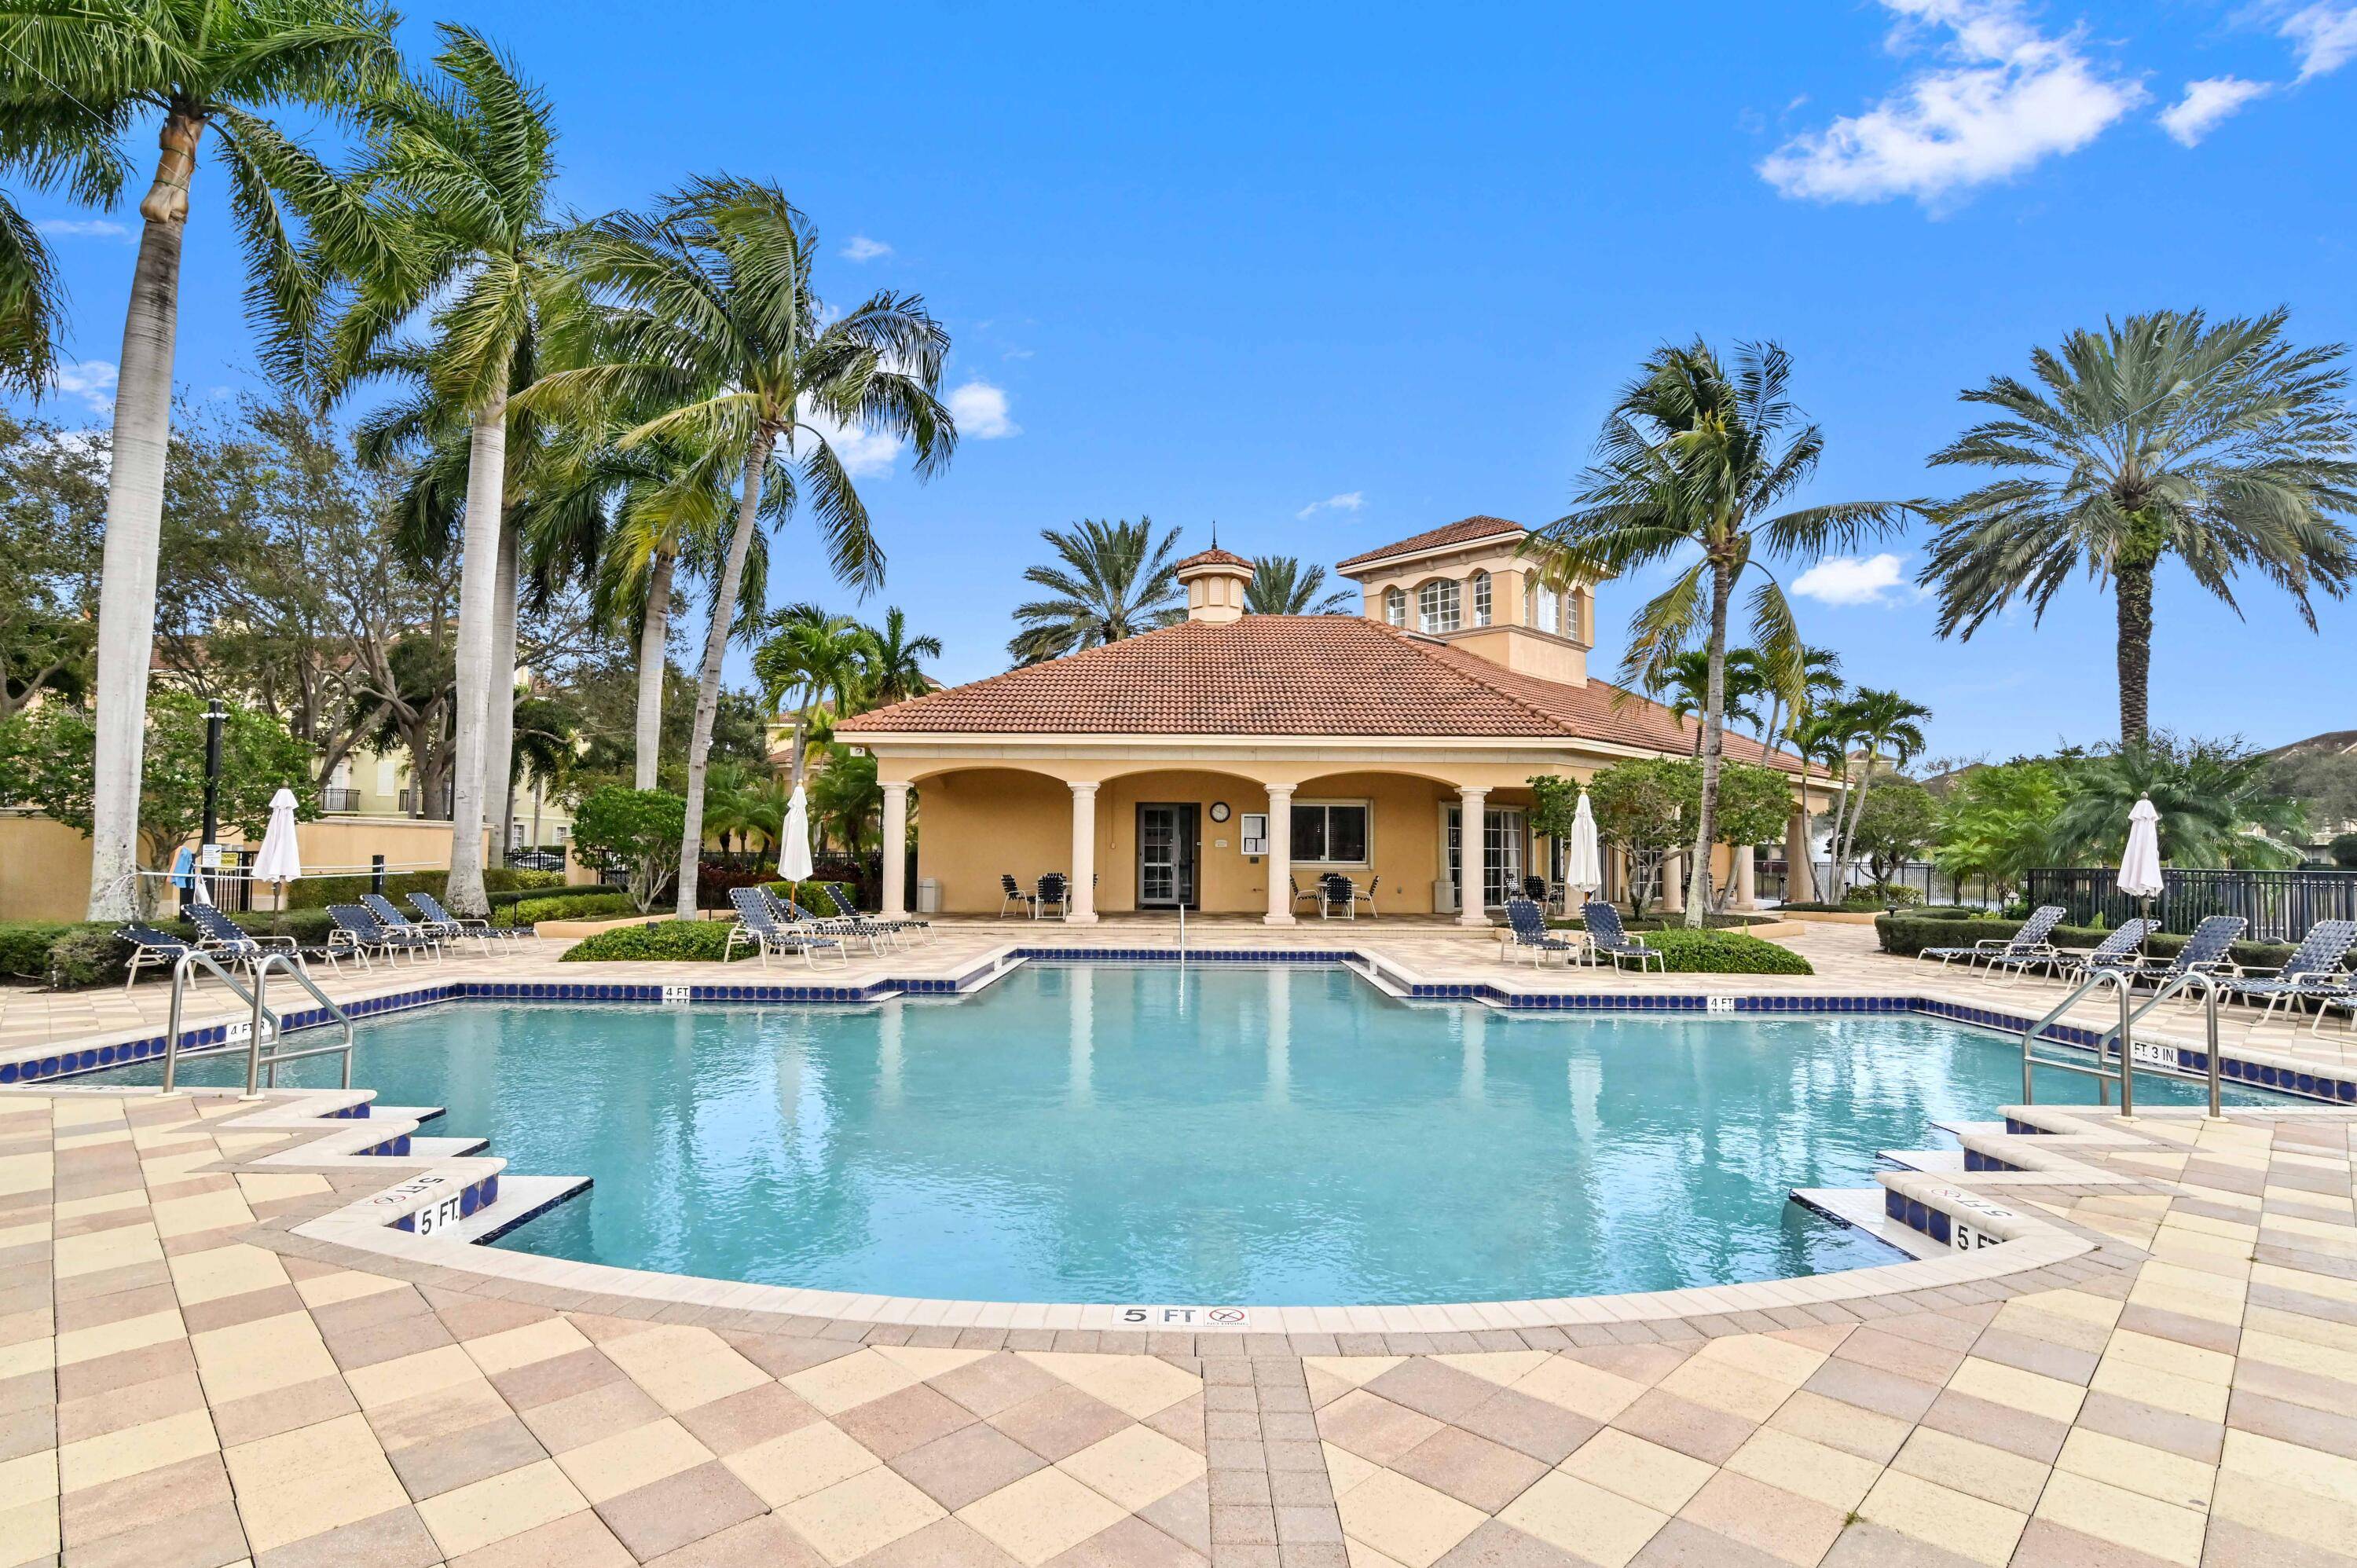 Discover a rare gem in the sought after community of Harbour Oaks, nestled in the heart of Palm Beach Gardens.